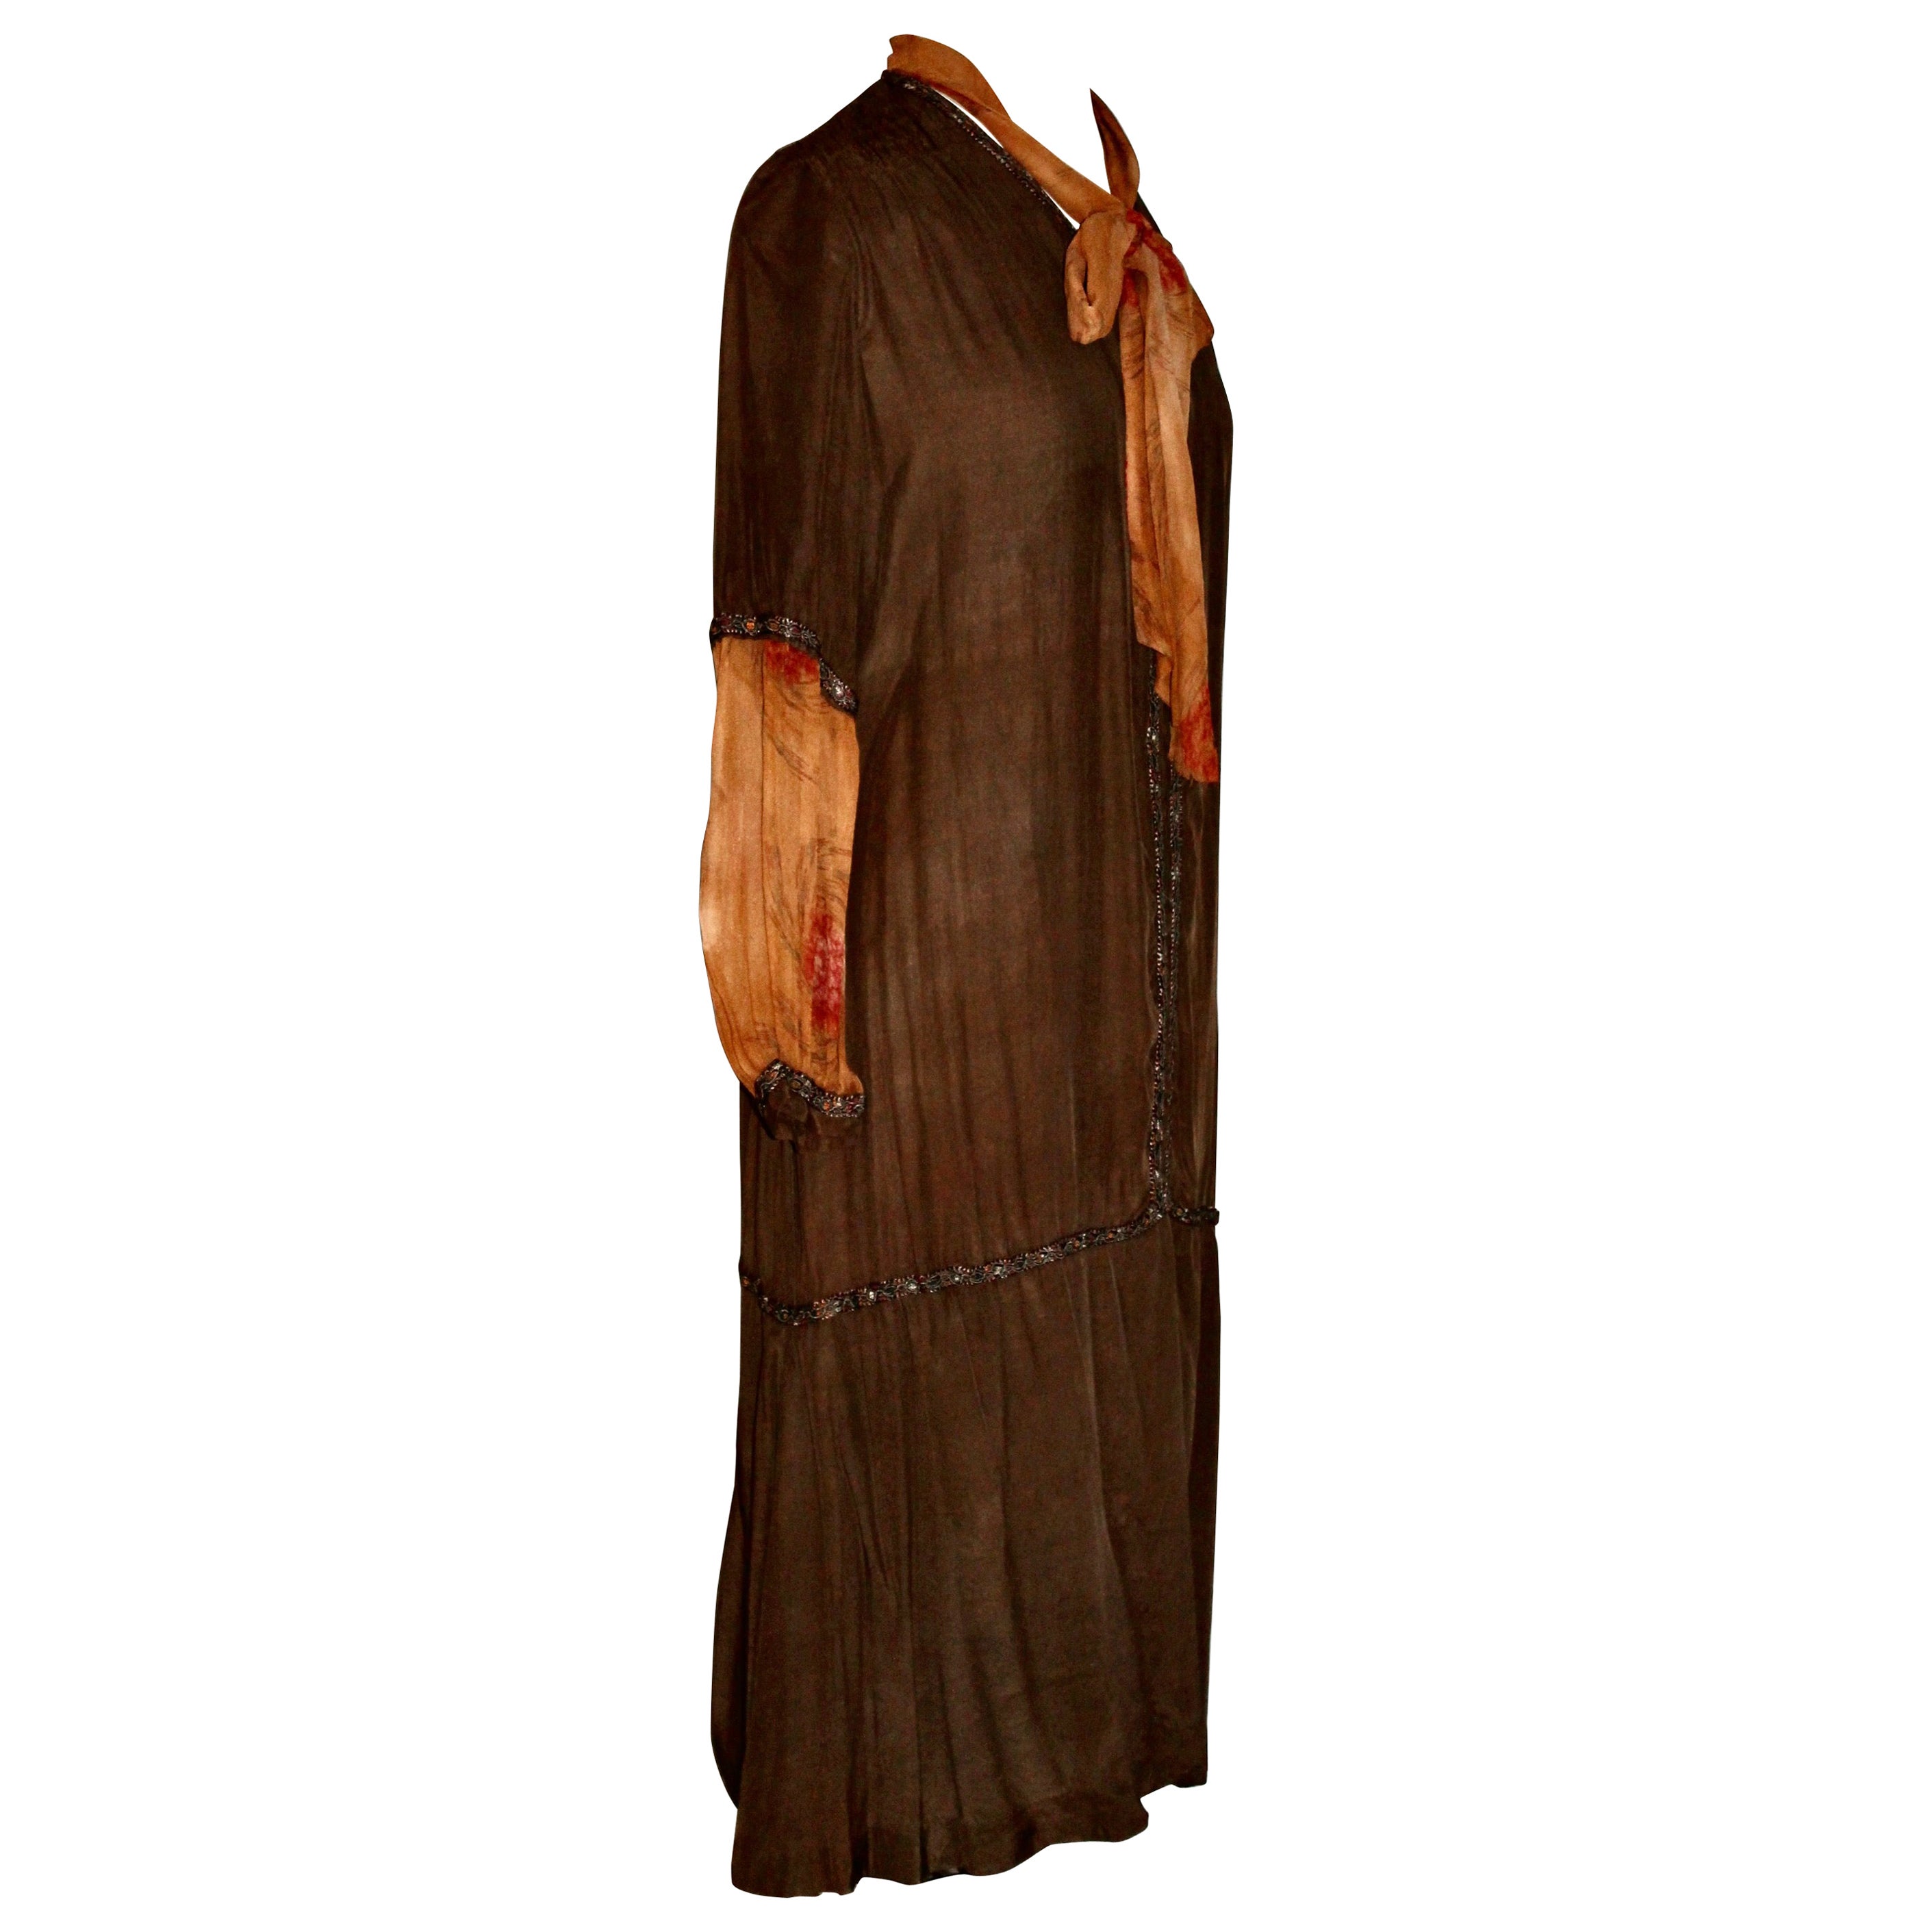 A Cinnamon and Pumpkin French 'Flapper' Cocktail Dress and Hat